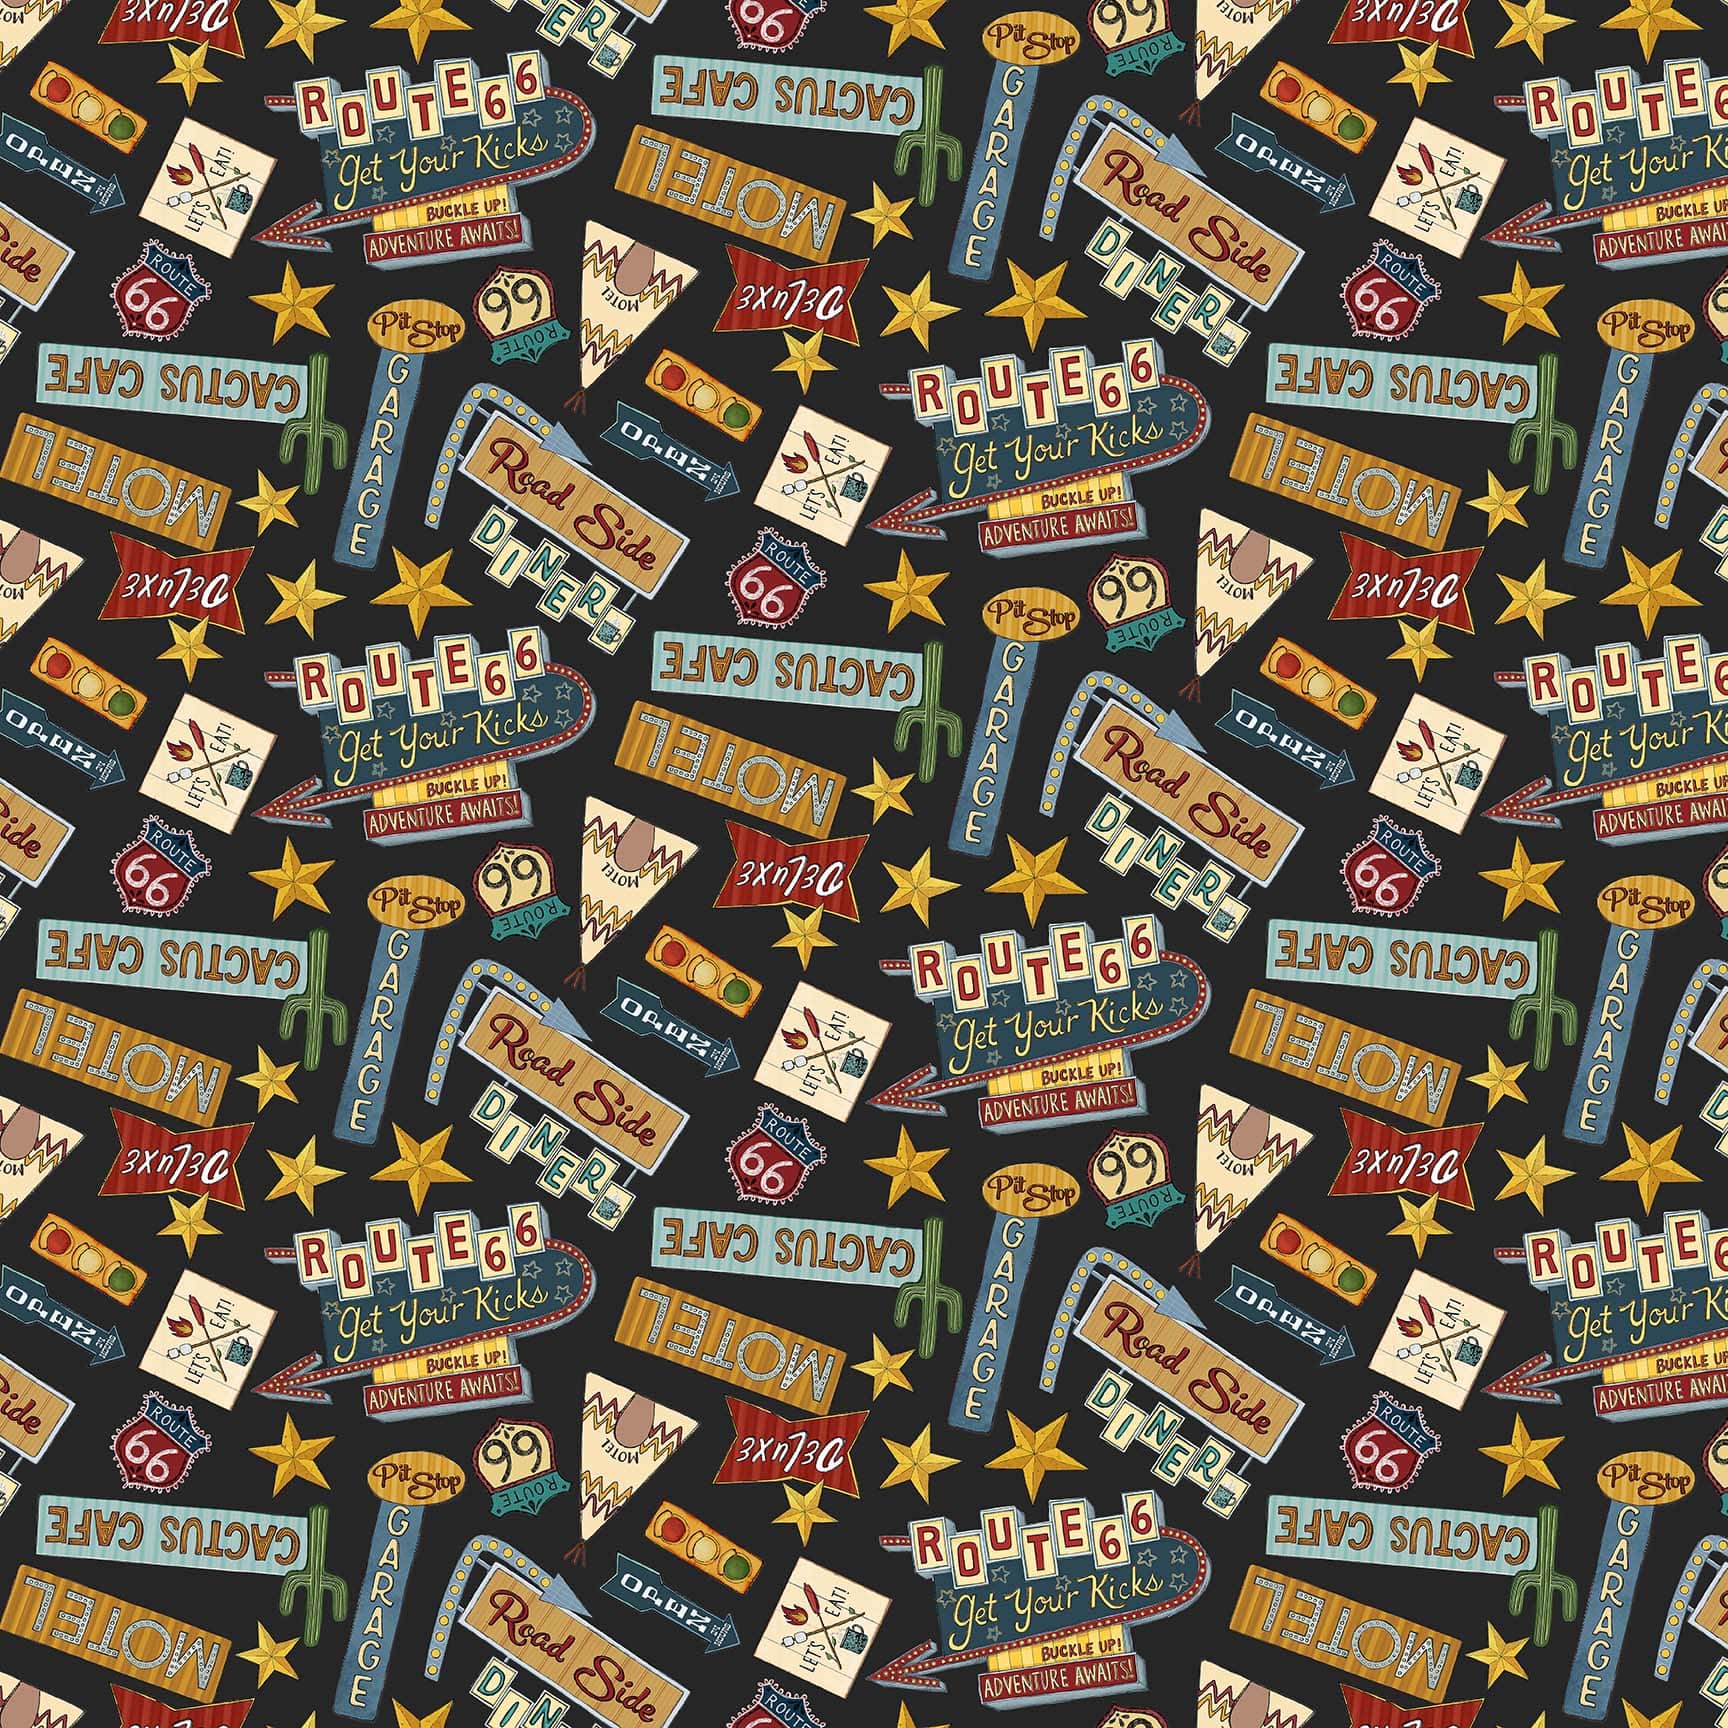 Adventure Awaits Quilt Fabric - Tossed Route 66 Icons in Black - 2943-99